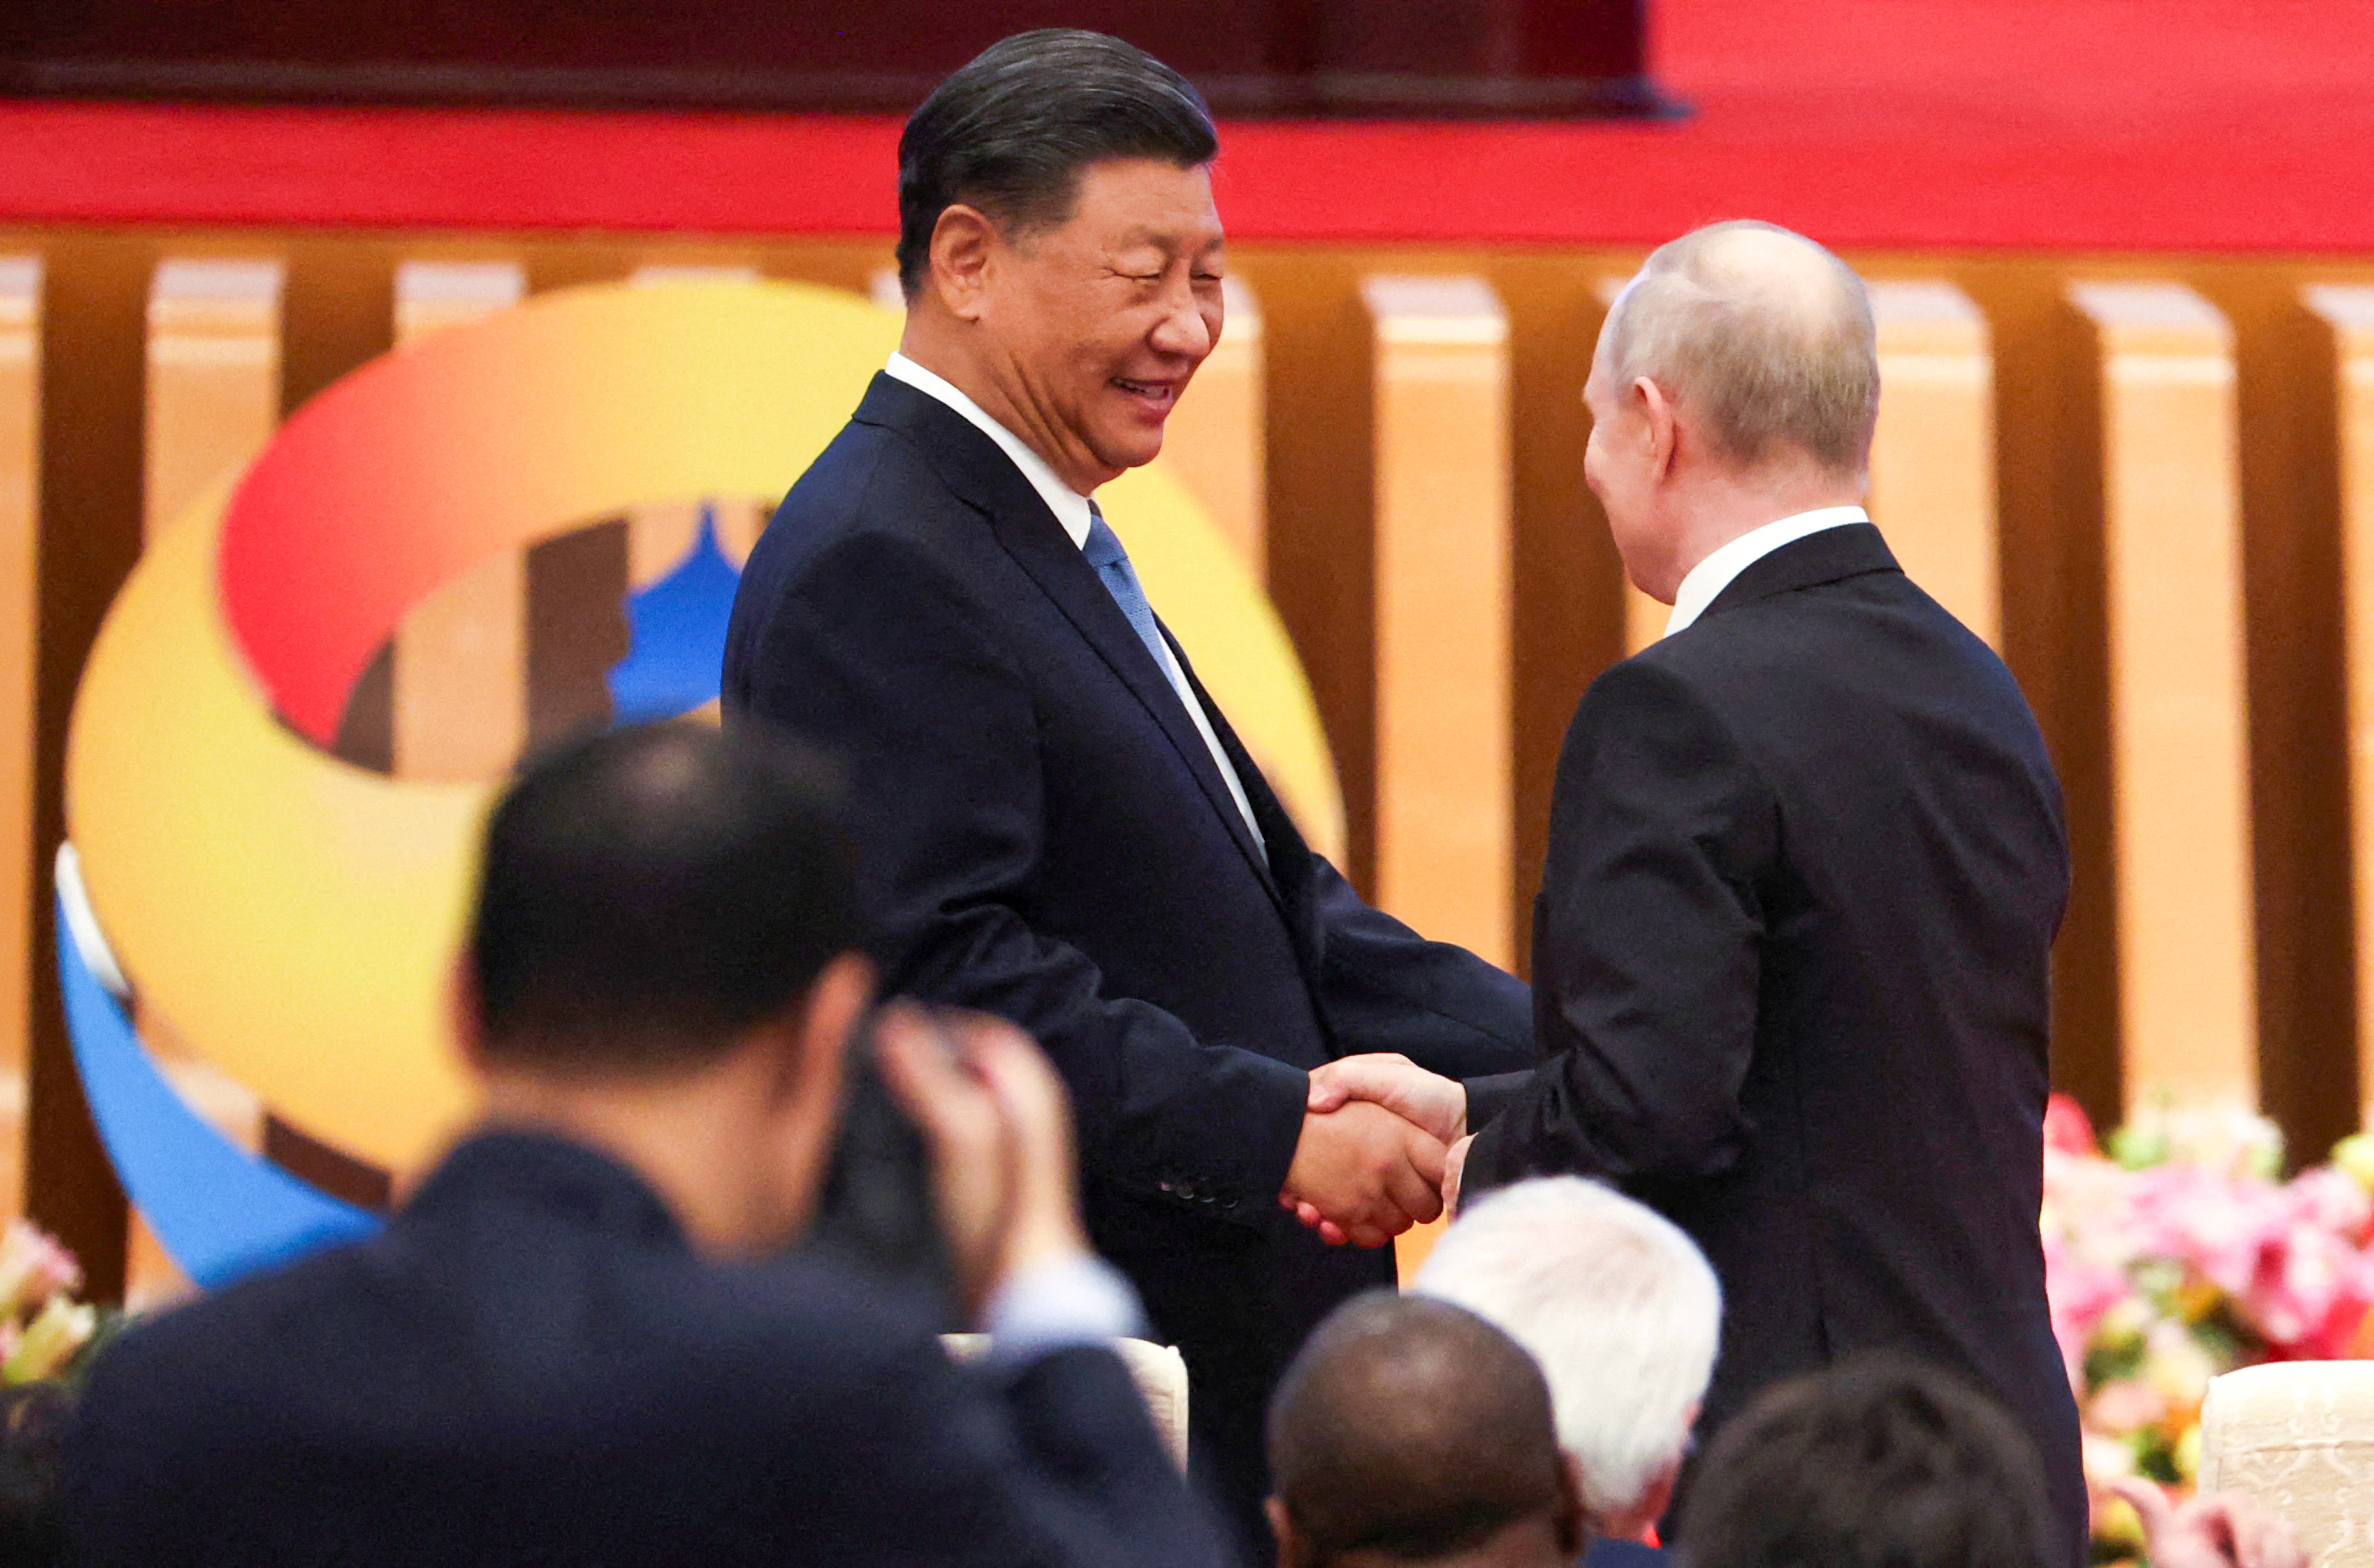 Xi Jinping greets Vladimir Putin at the belt and road forum in Beijing on Wednesday. Photo: Reuters